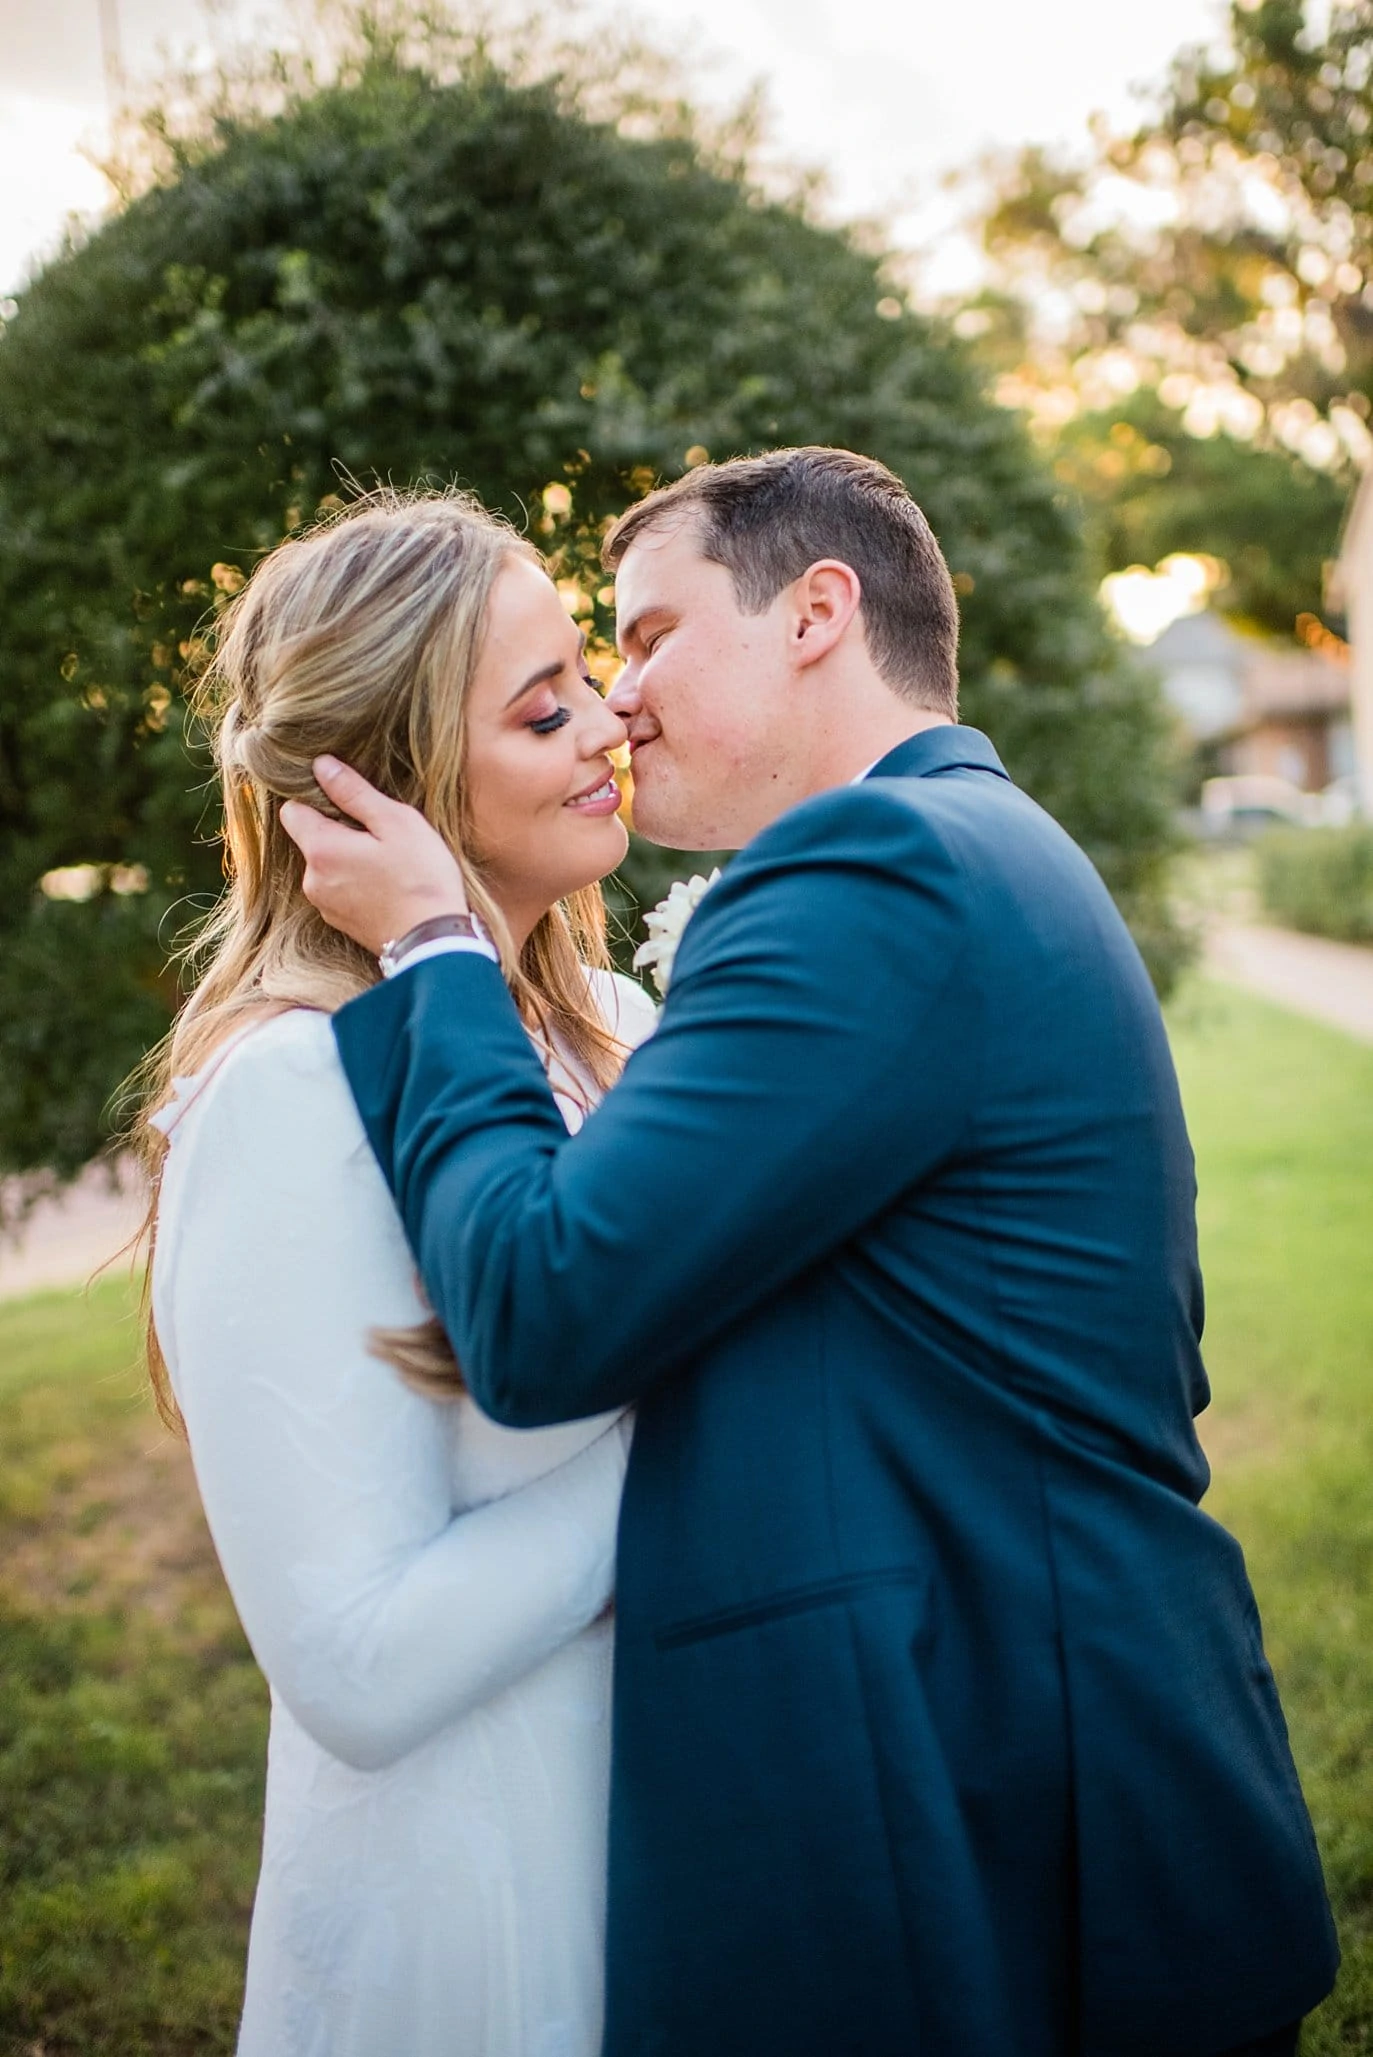 intimate sunset portrait of bride and groom at The Forum Wichita Falls Texas wedding by Wichita Falls wedding photographer Jennie Crate